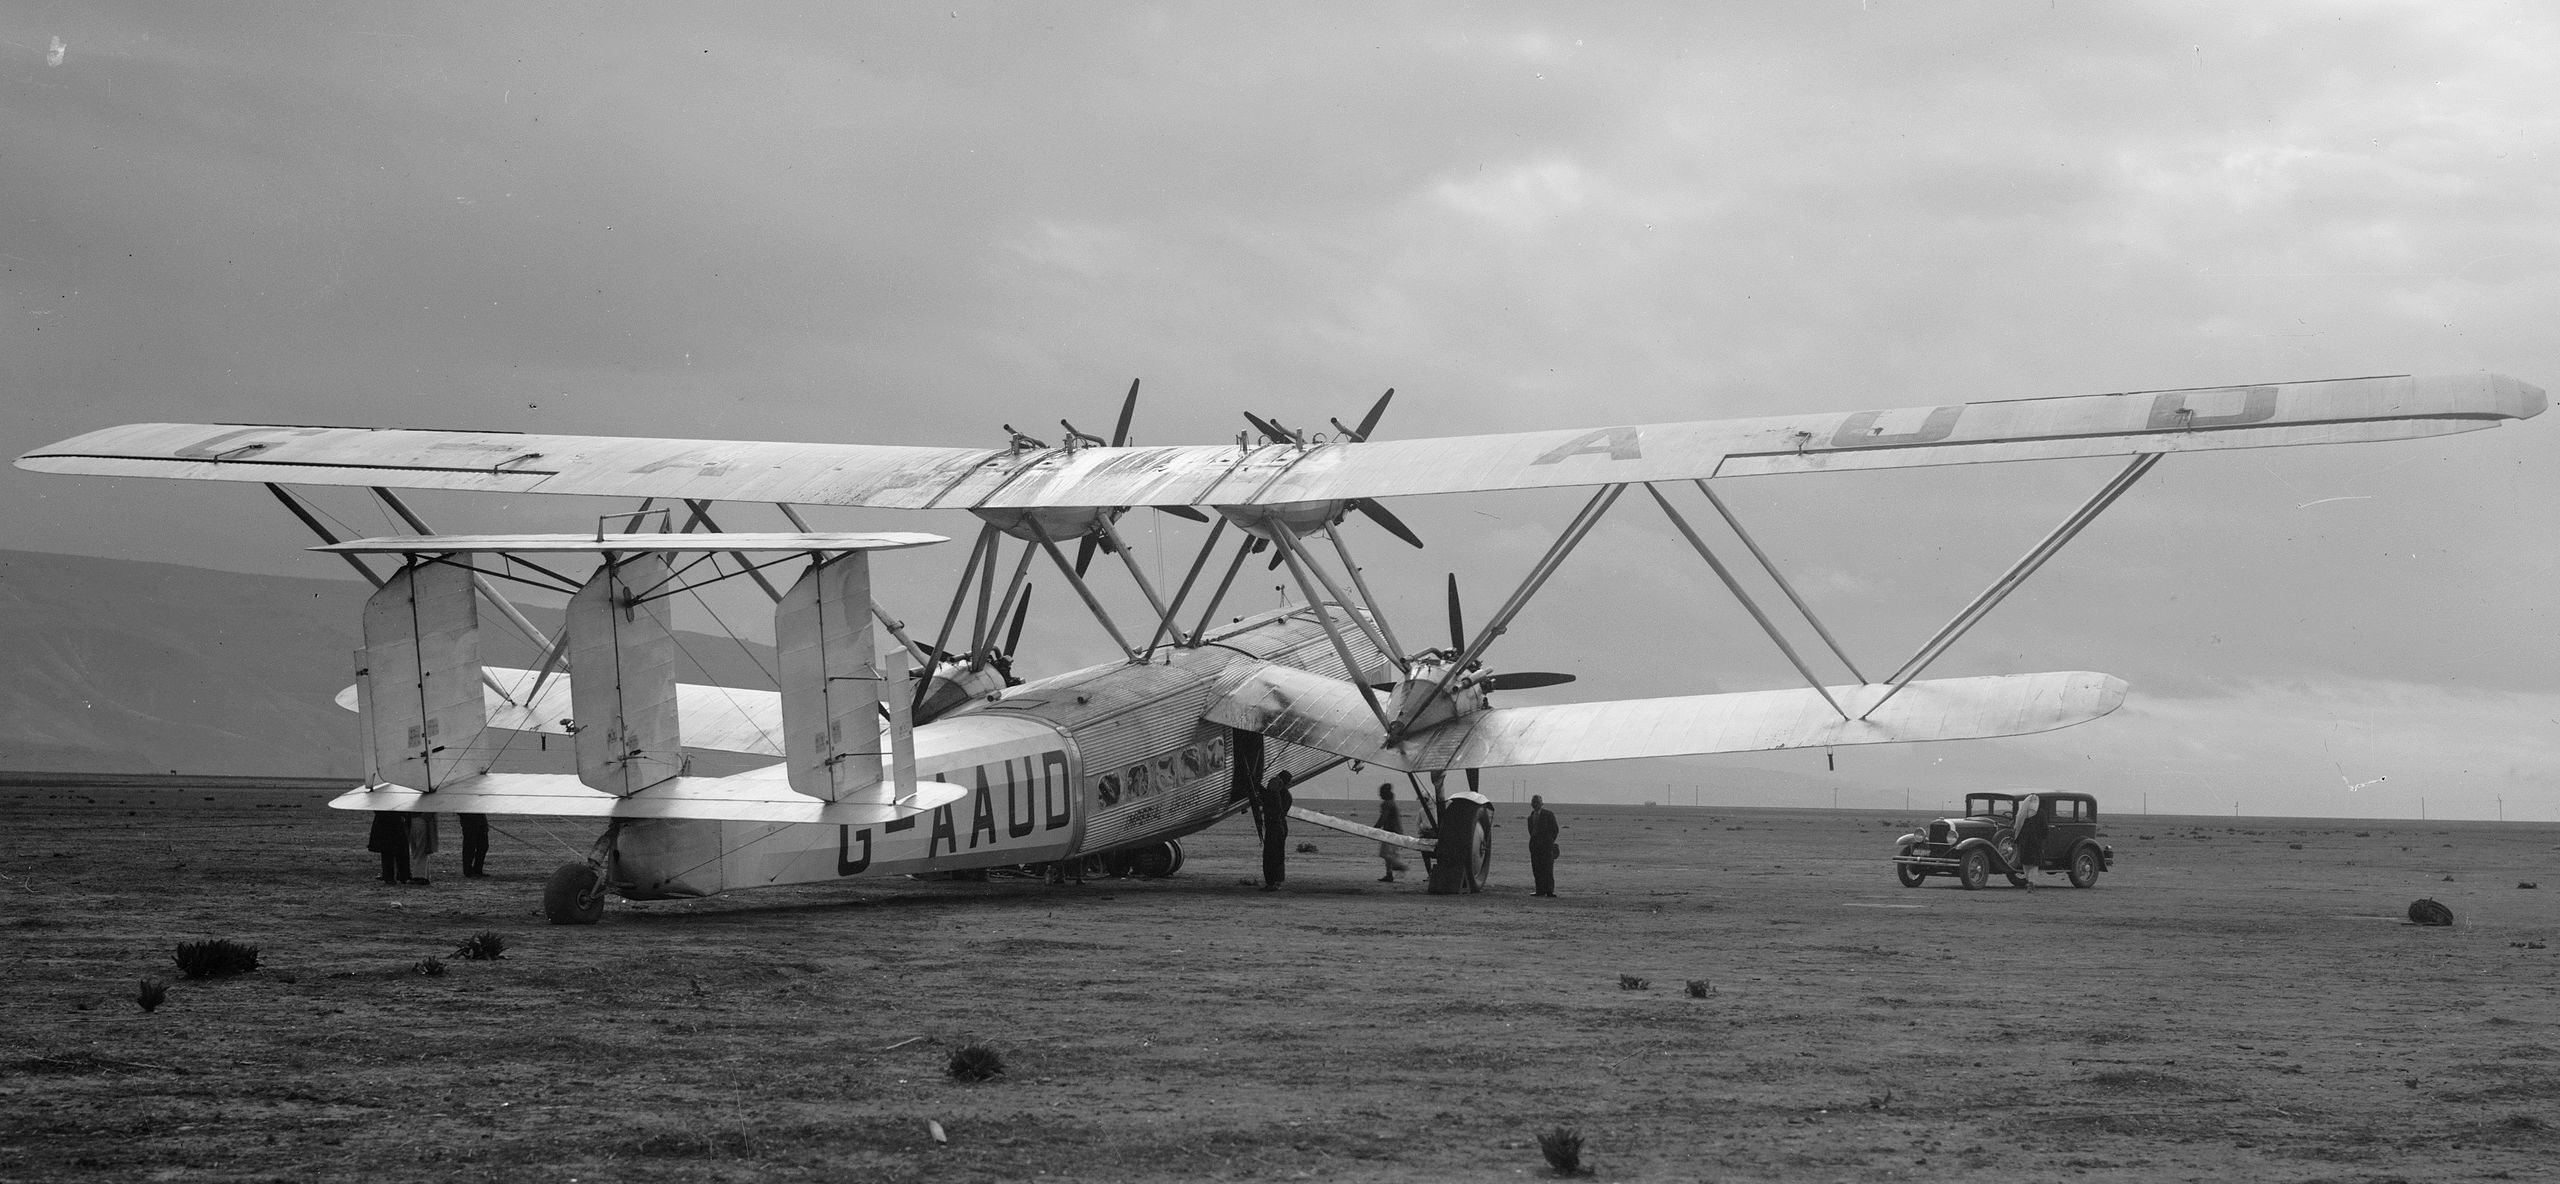 A Handley Page H.P.42 Hanno of the Imperial Airways parked on a field.